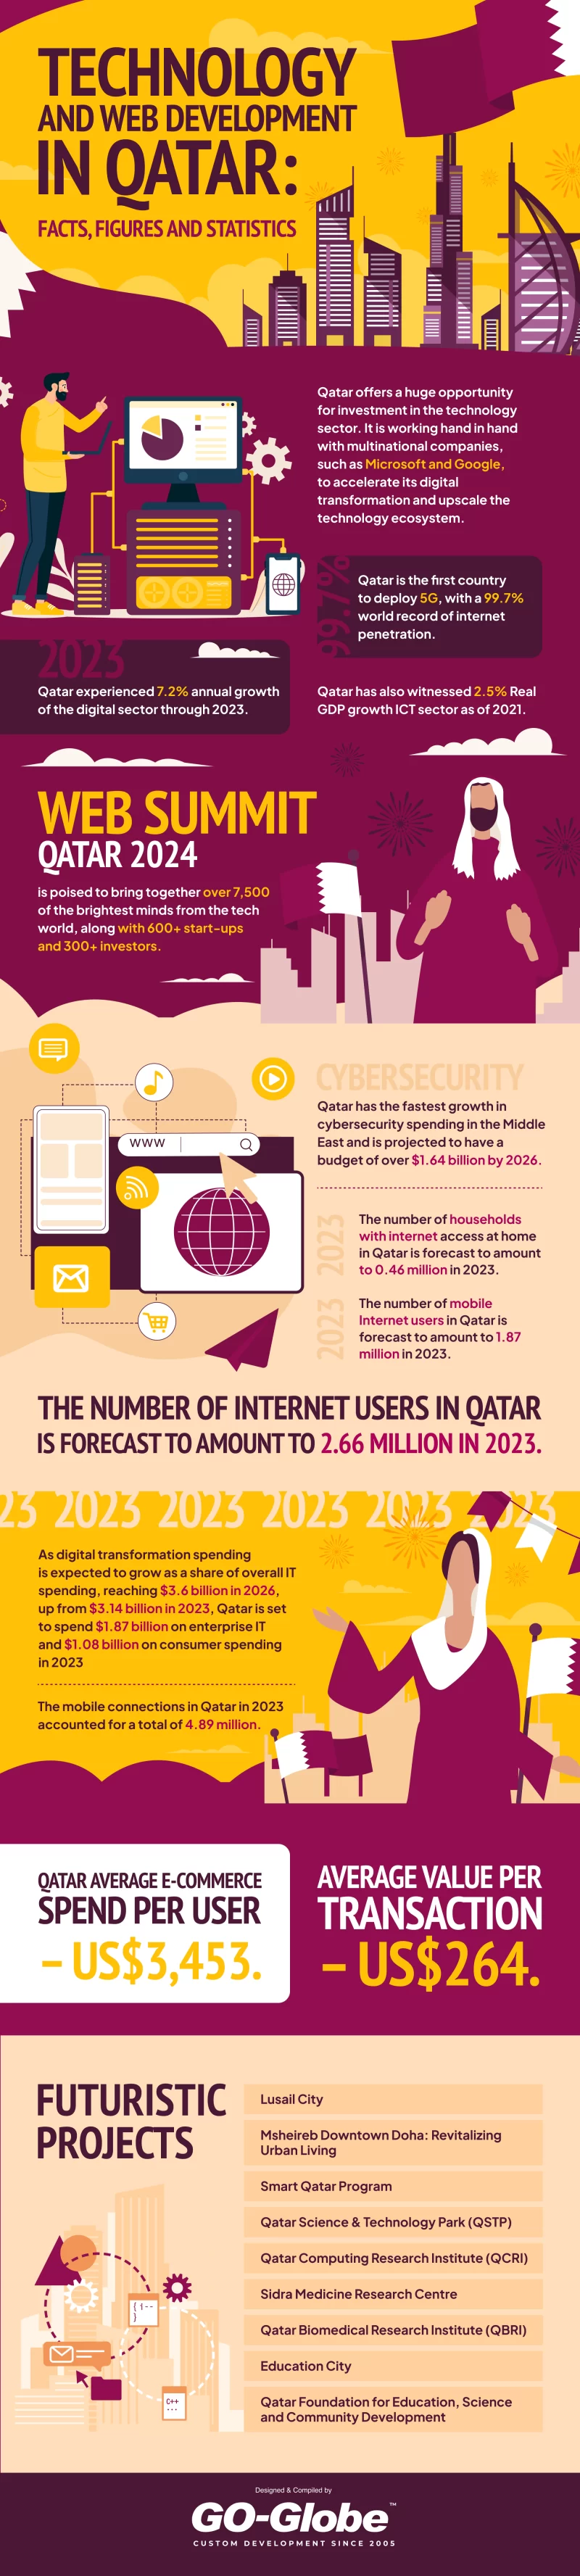 Technology and Web Development in Qatar_ Facts, Figures and Statistics